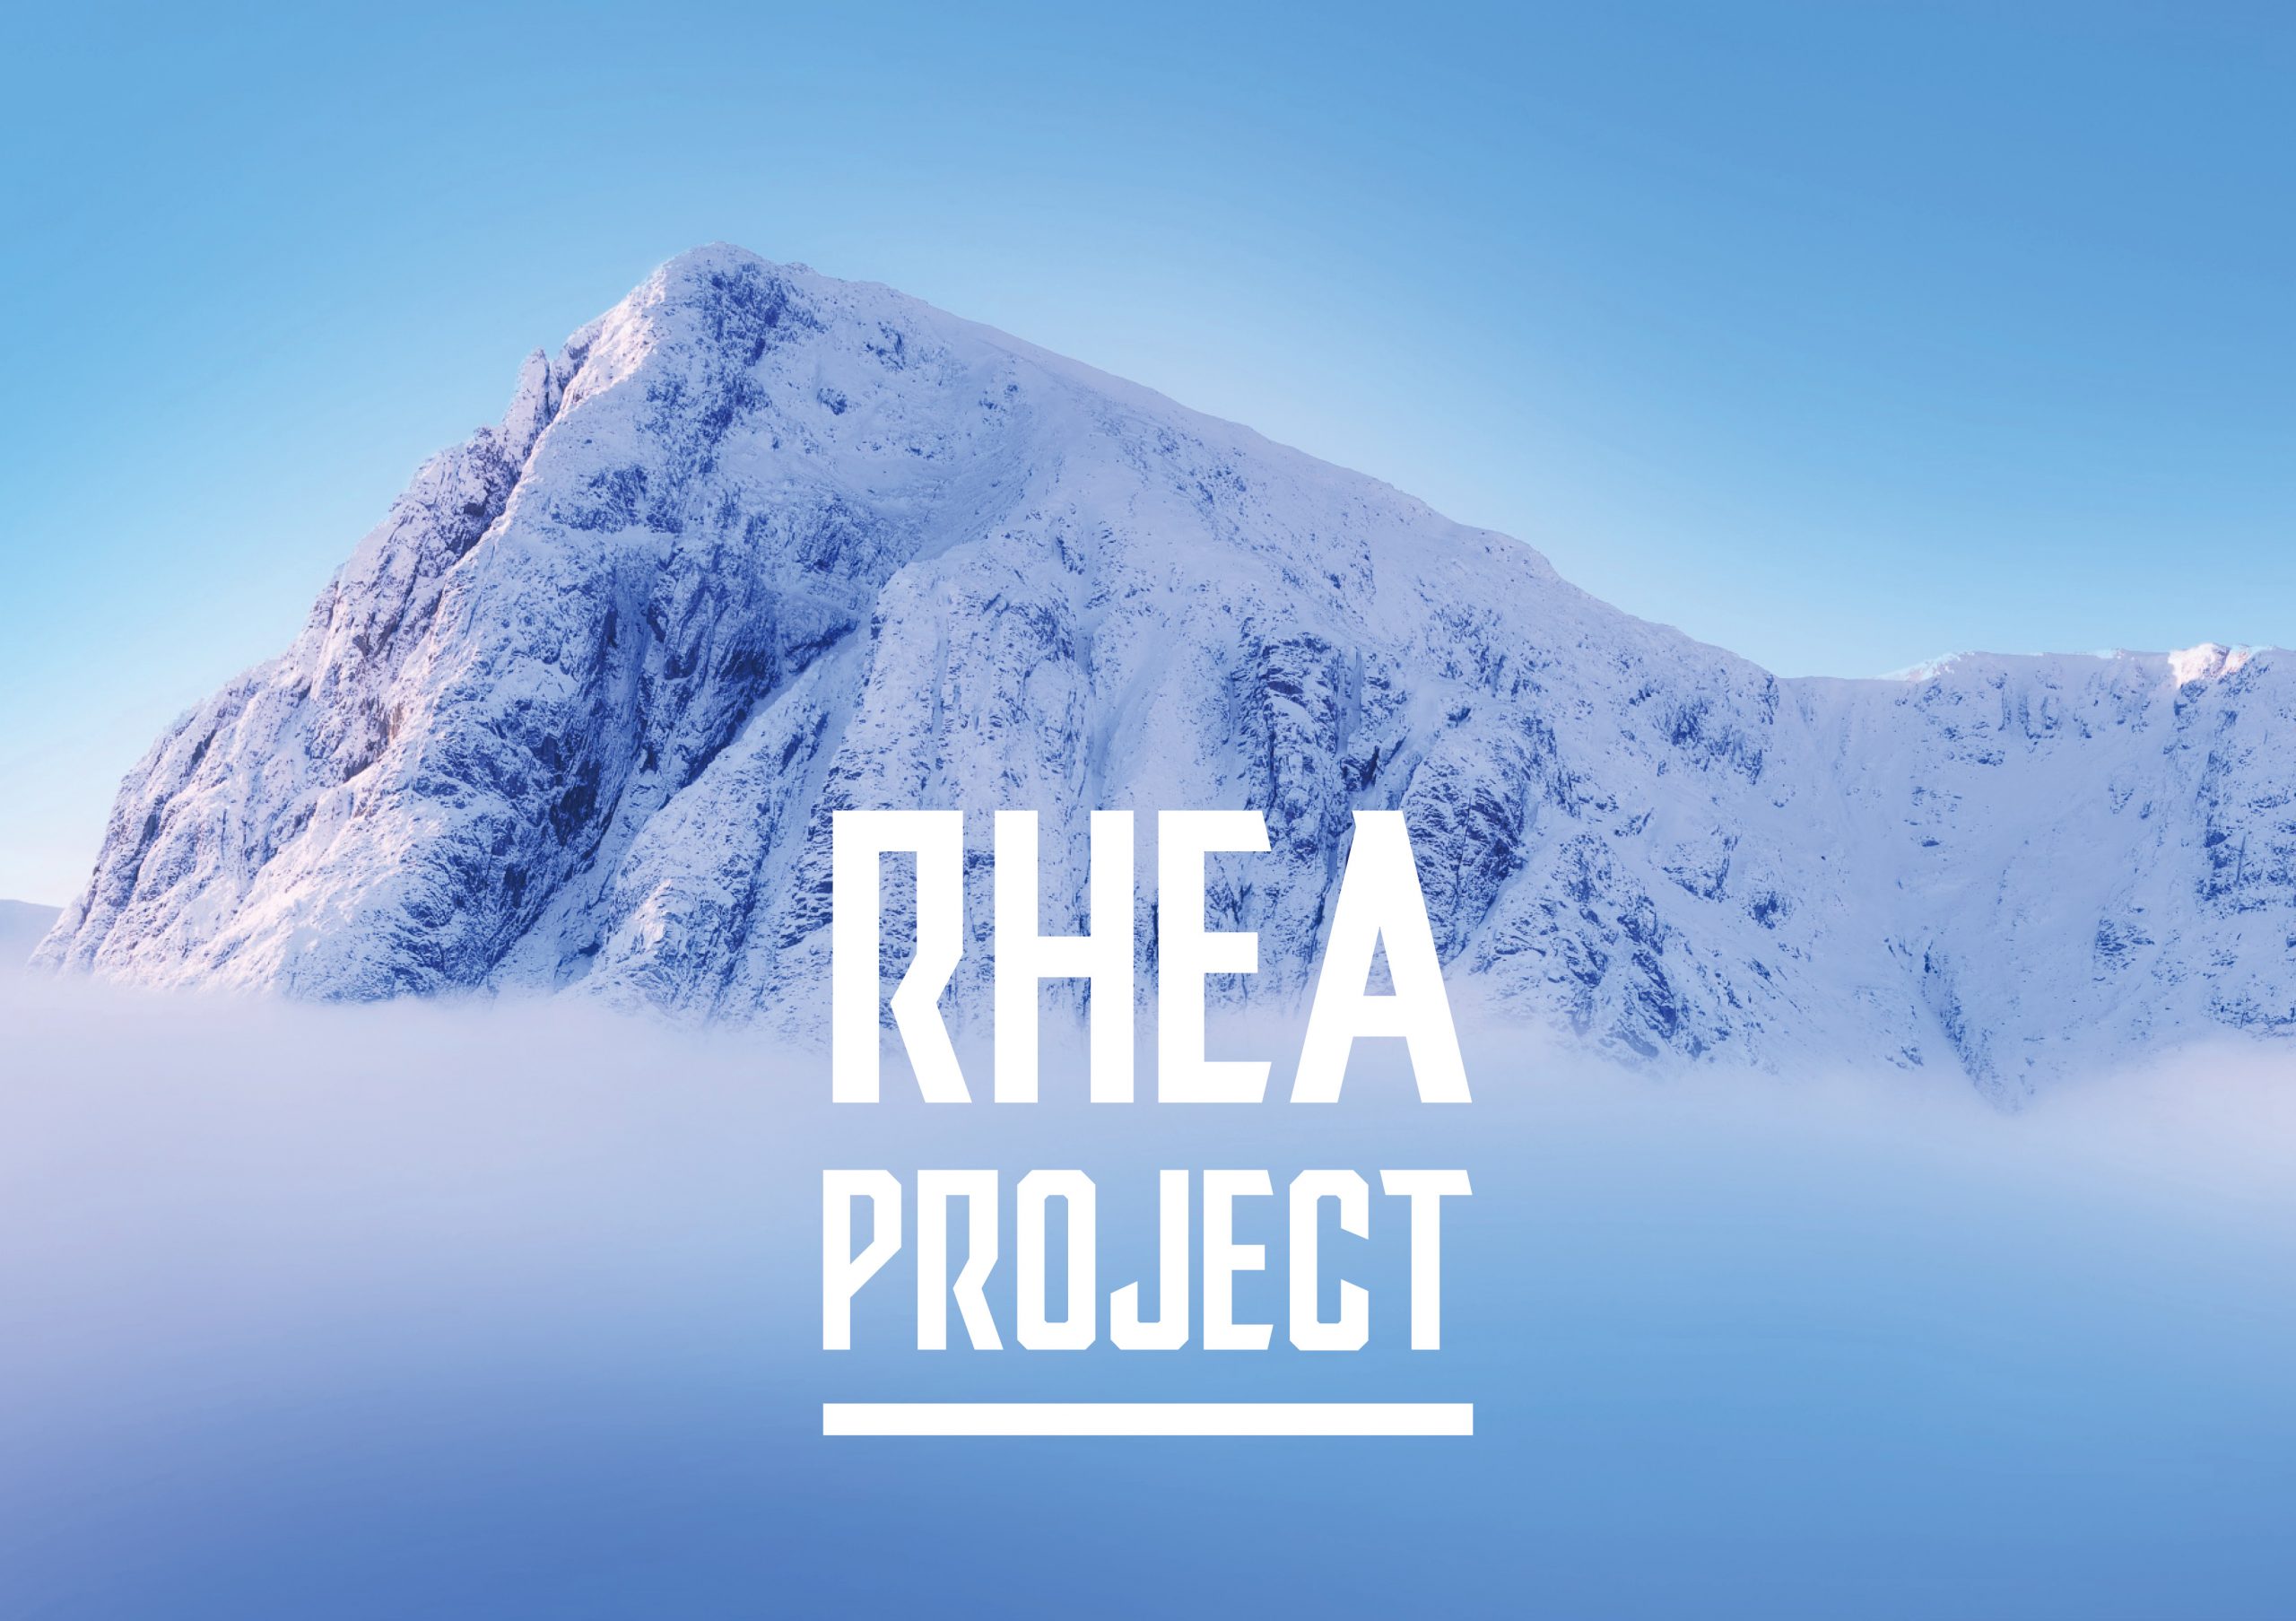 Rhea Project - Mountain Search and Rescue Outfit Designs